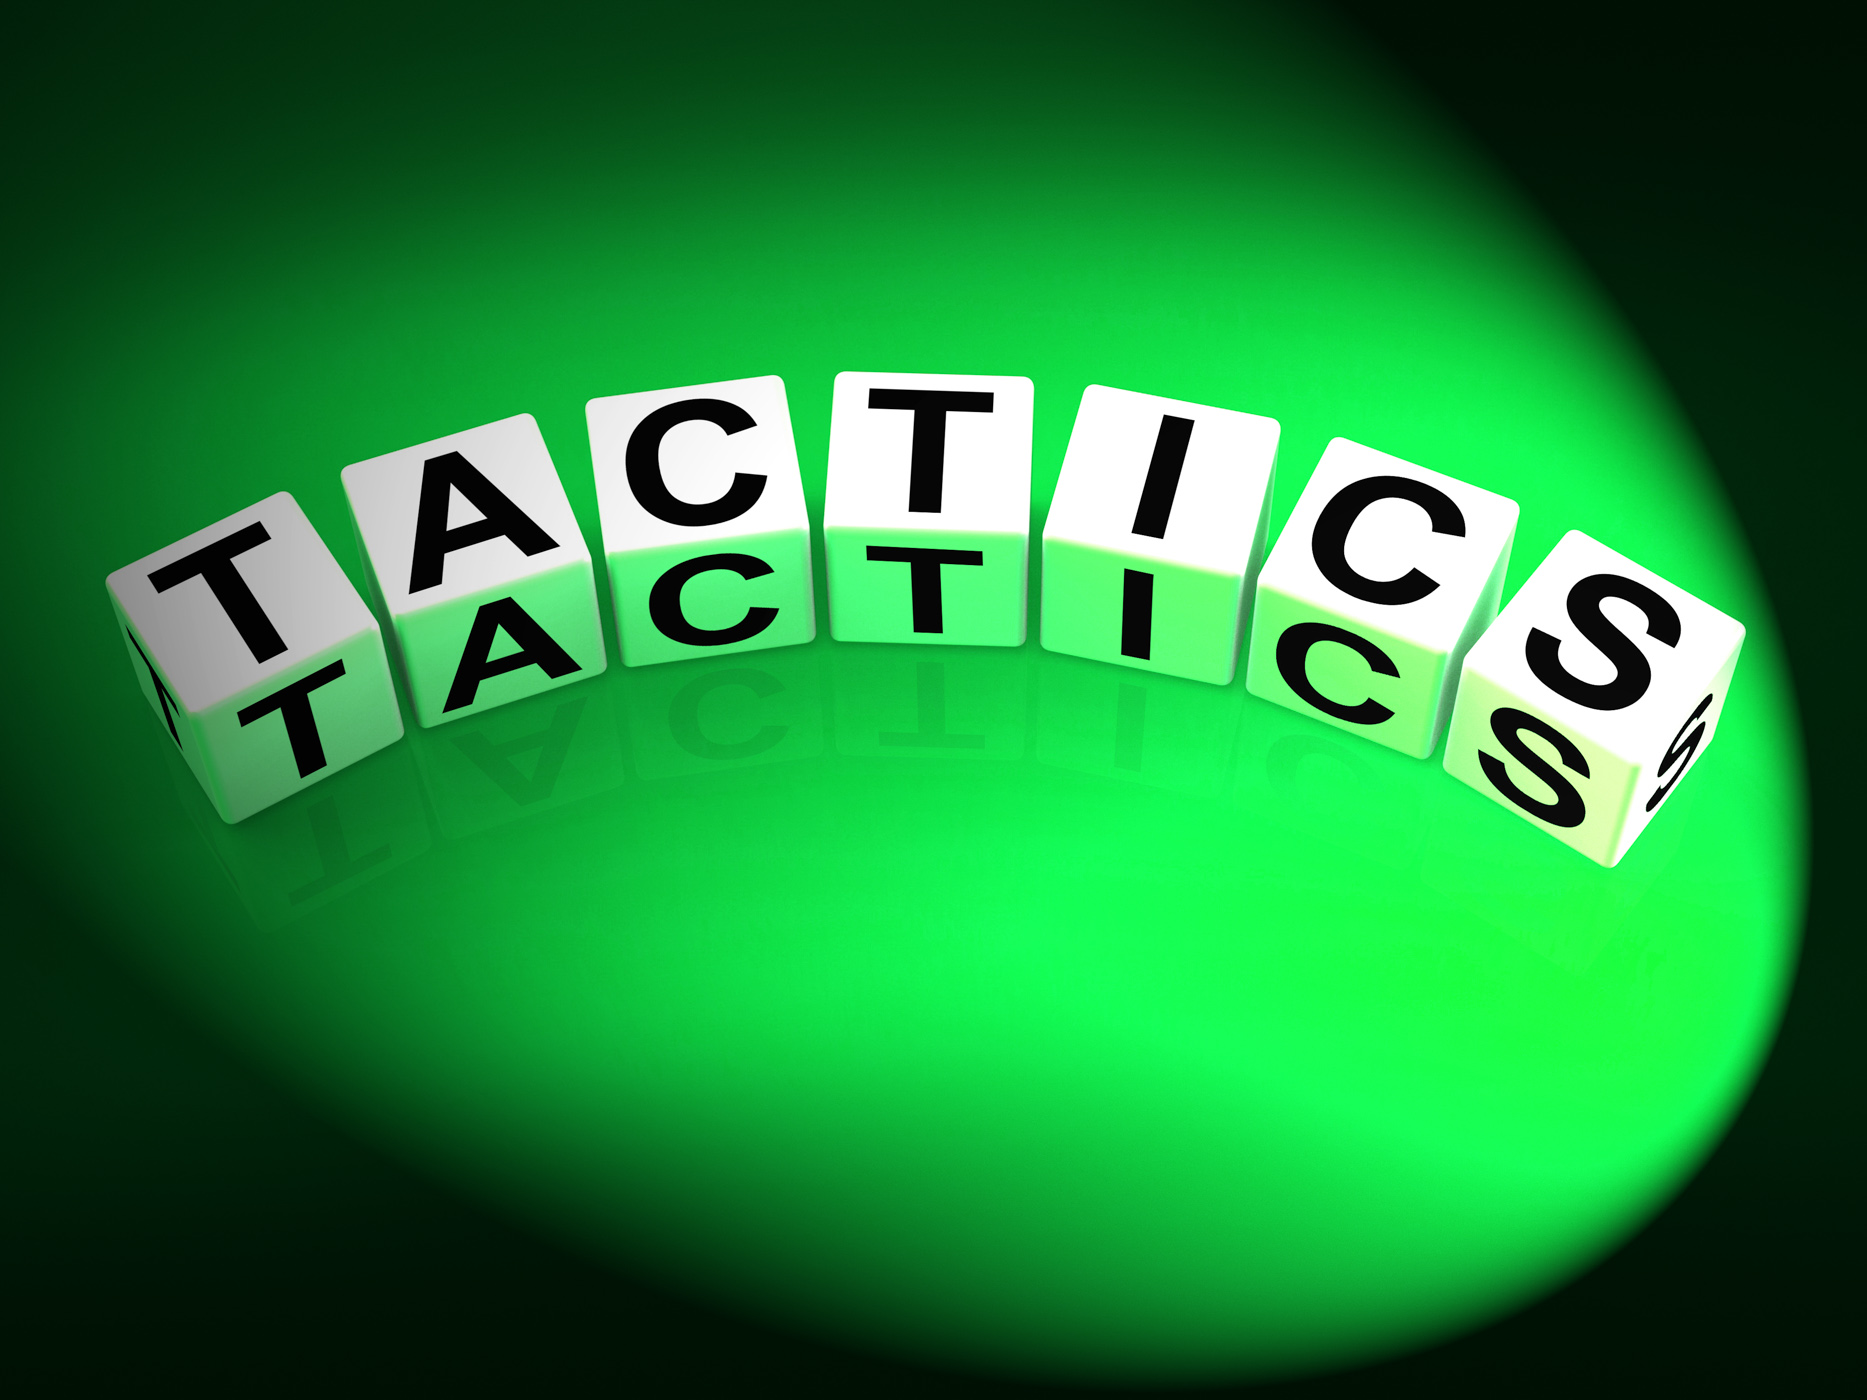 Tactics dice show strategy approach and technique photo